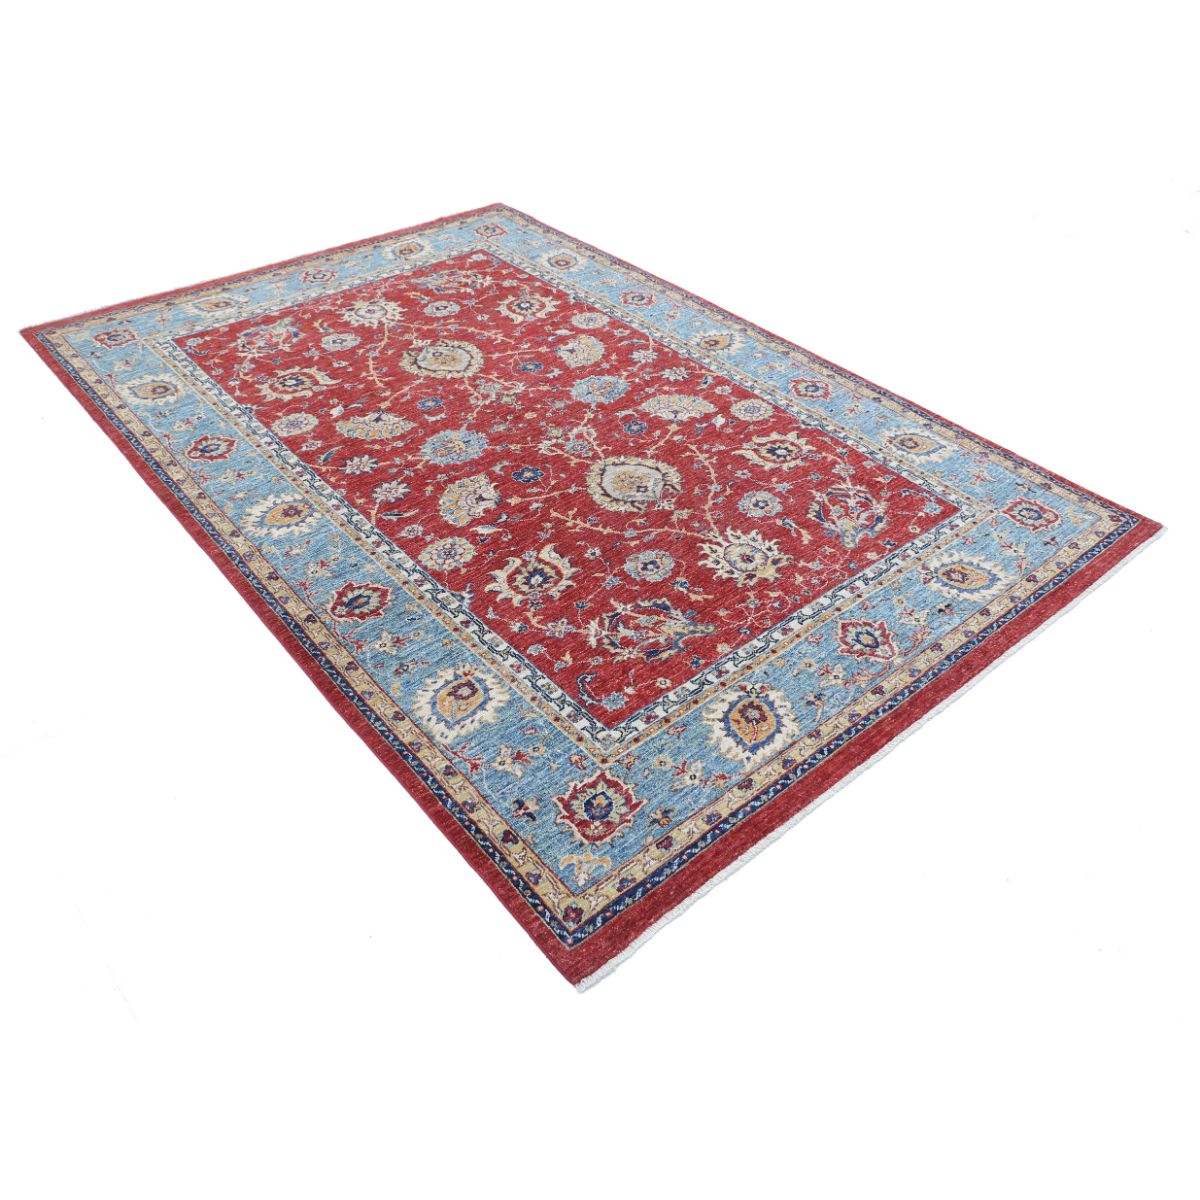 Ziegler 5'8" X 7'11" Wool Hand-Knotted Rug